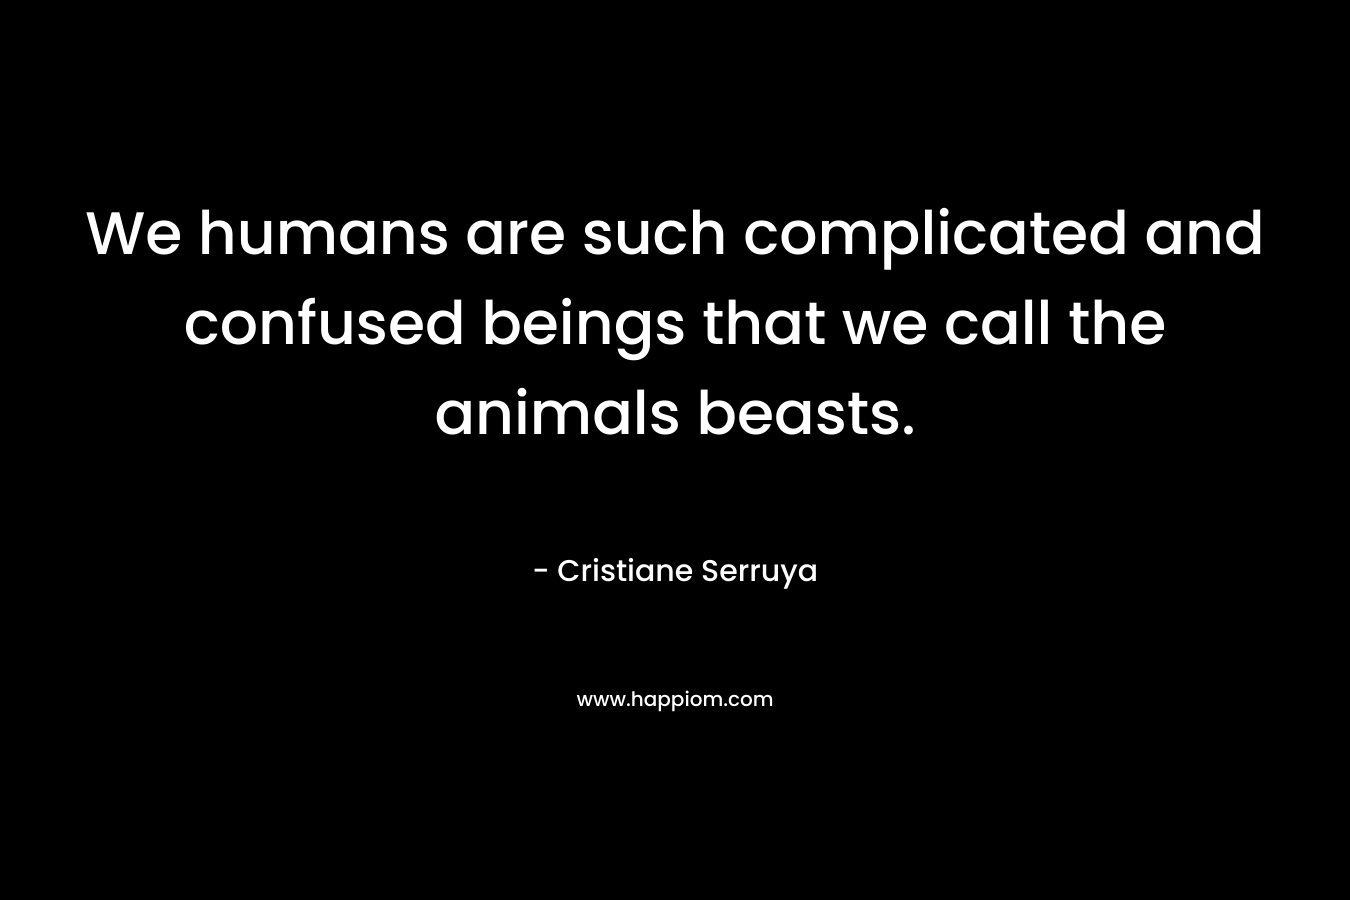 We humans are such complicated and confused beings that we call the animals beasts. – Cristiane Serruya